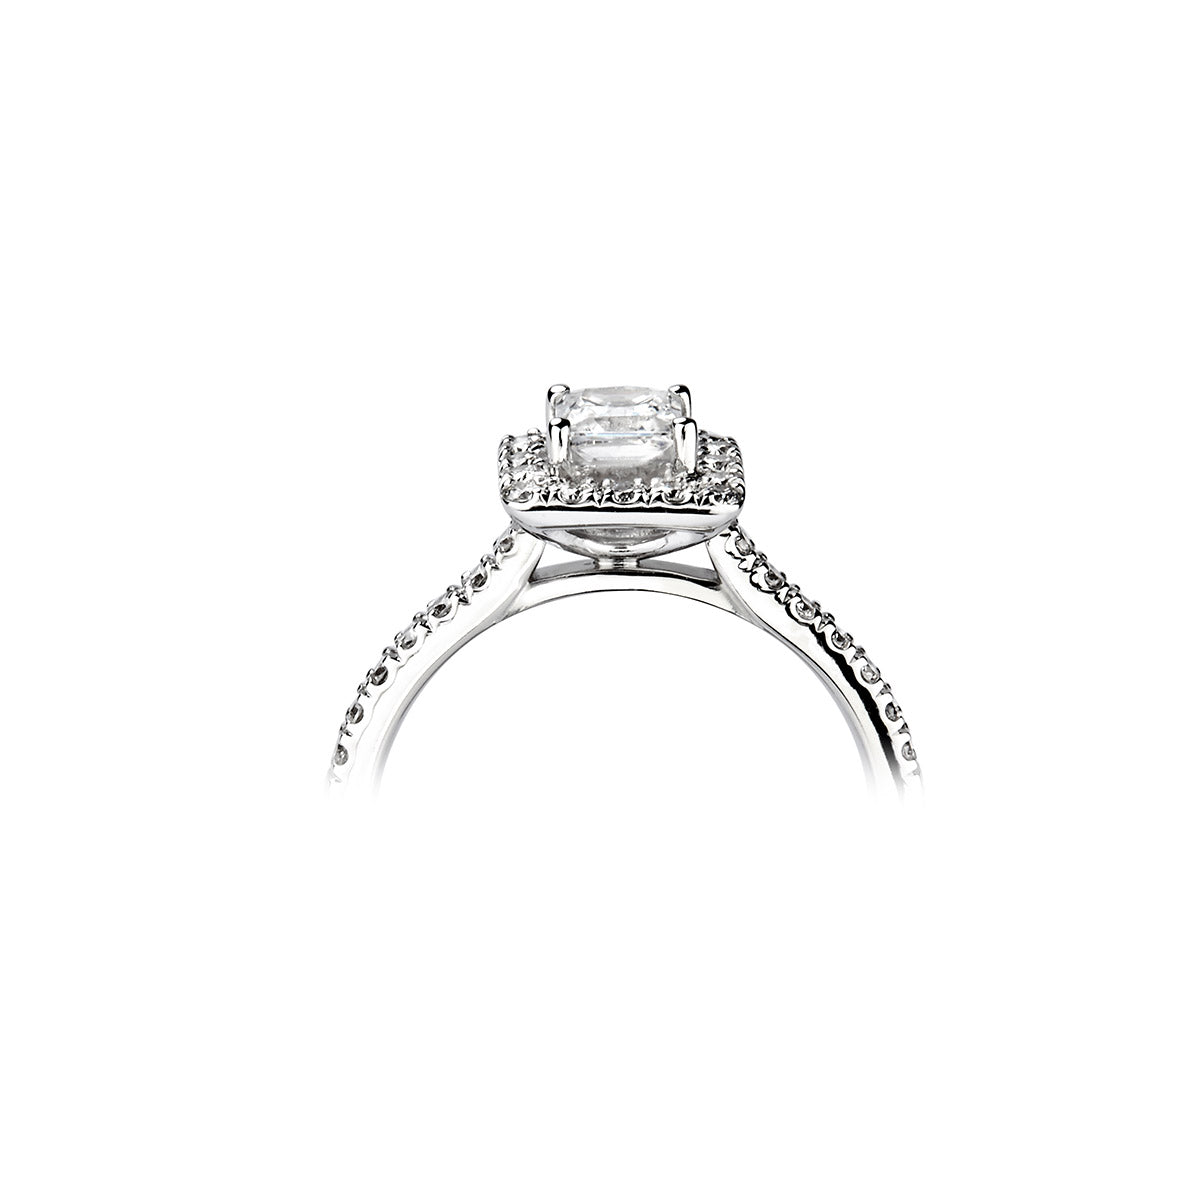 Princess square cut diamond 4 claw halo set with stone set shoulder ring